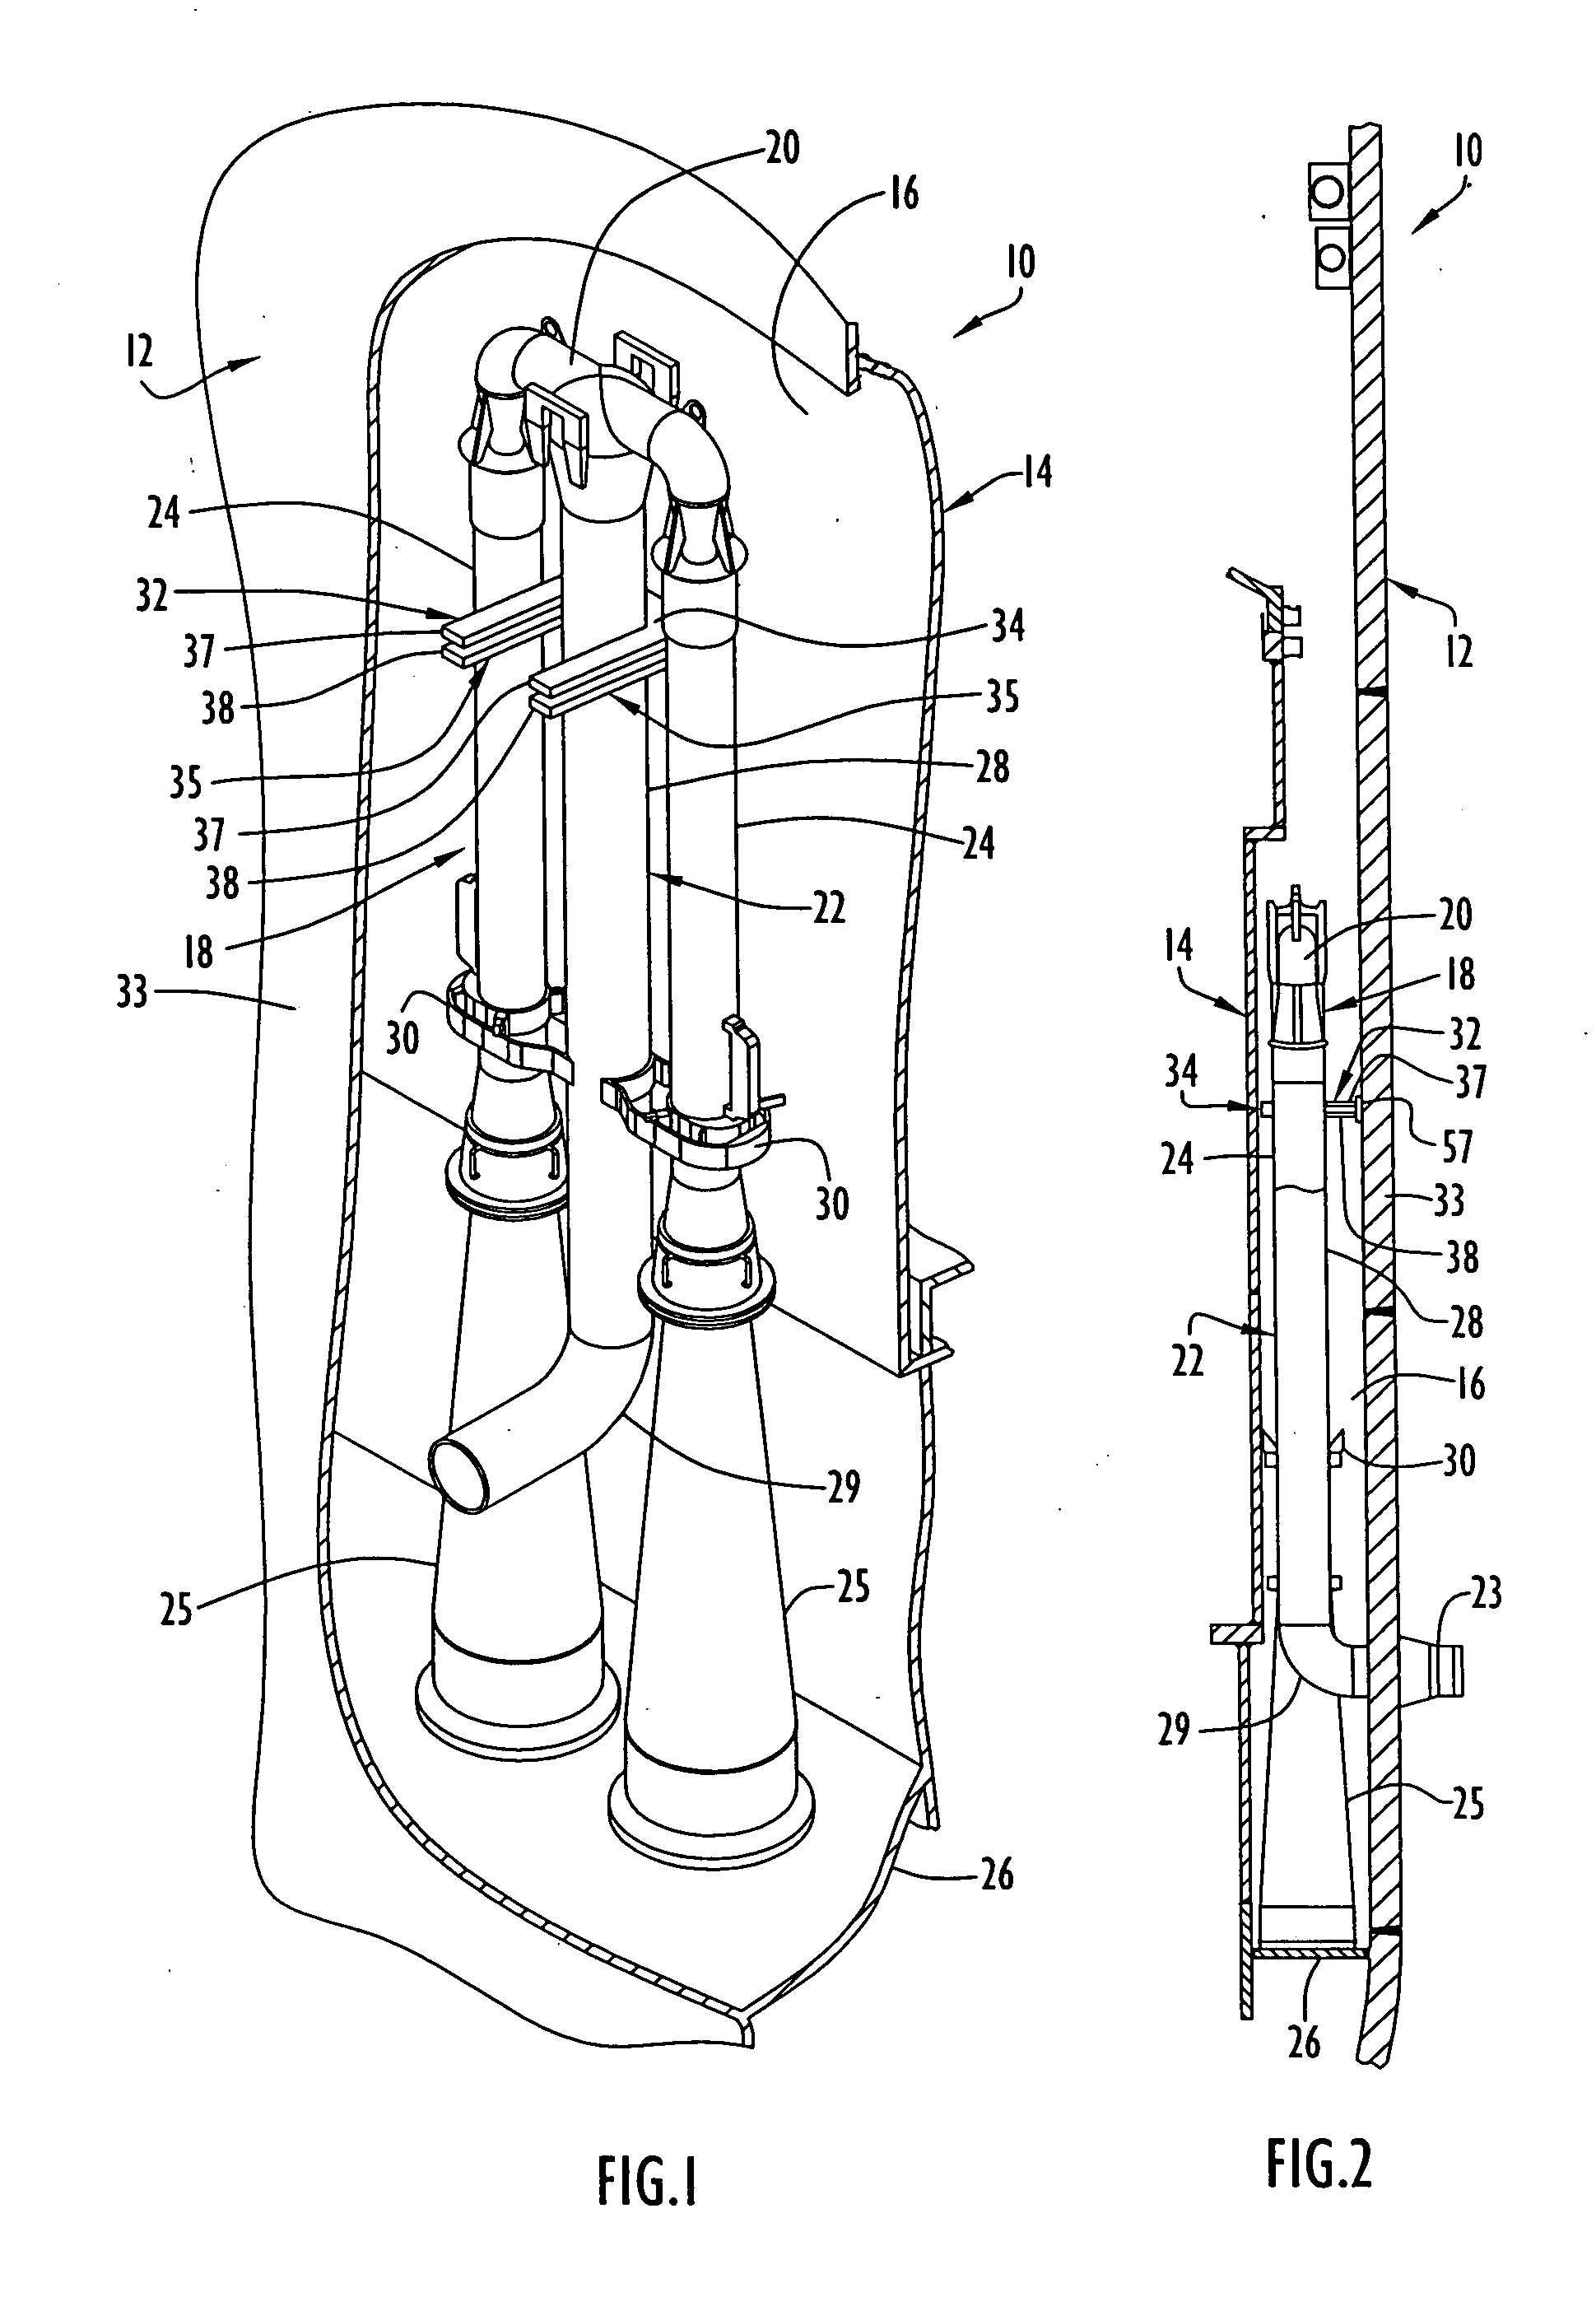 Apparatus and method for mechanically reinforcing the welds between riser pipes and riser braces in boiling water reactors